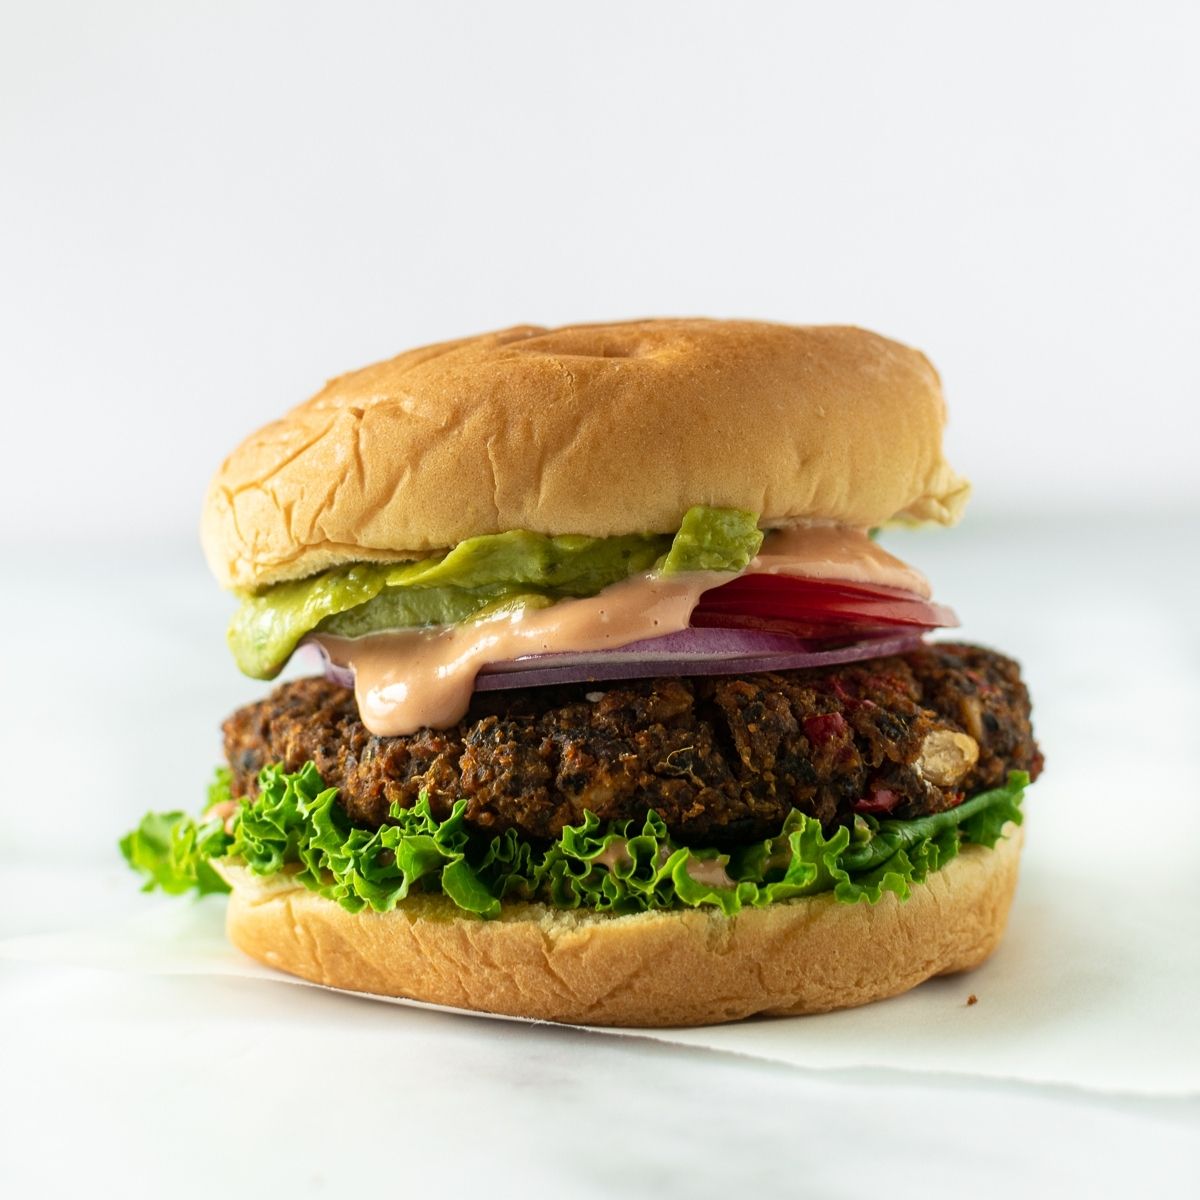 veggie burger topped with lettuce, tomato, onion, special sauce, and guacamole.